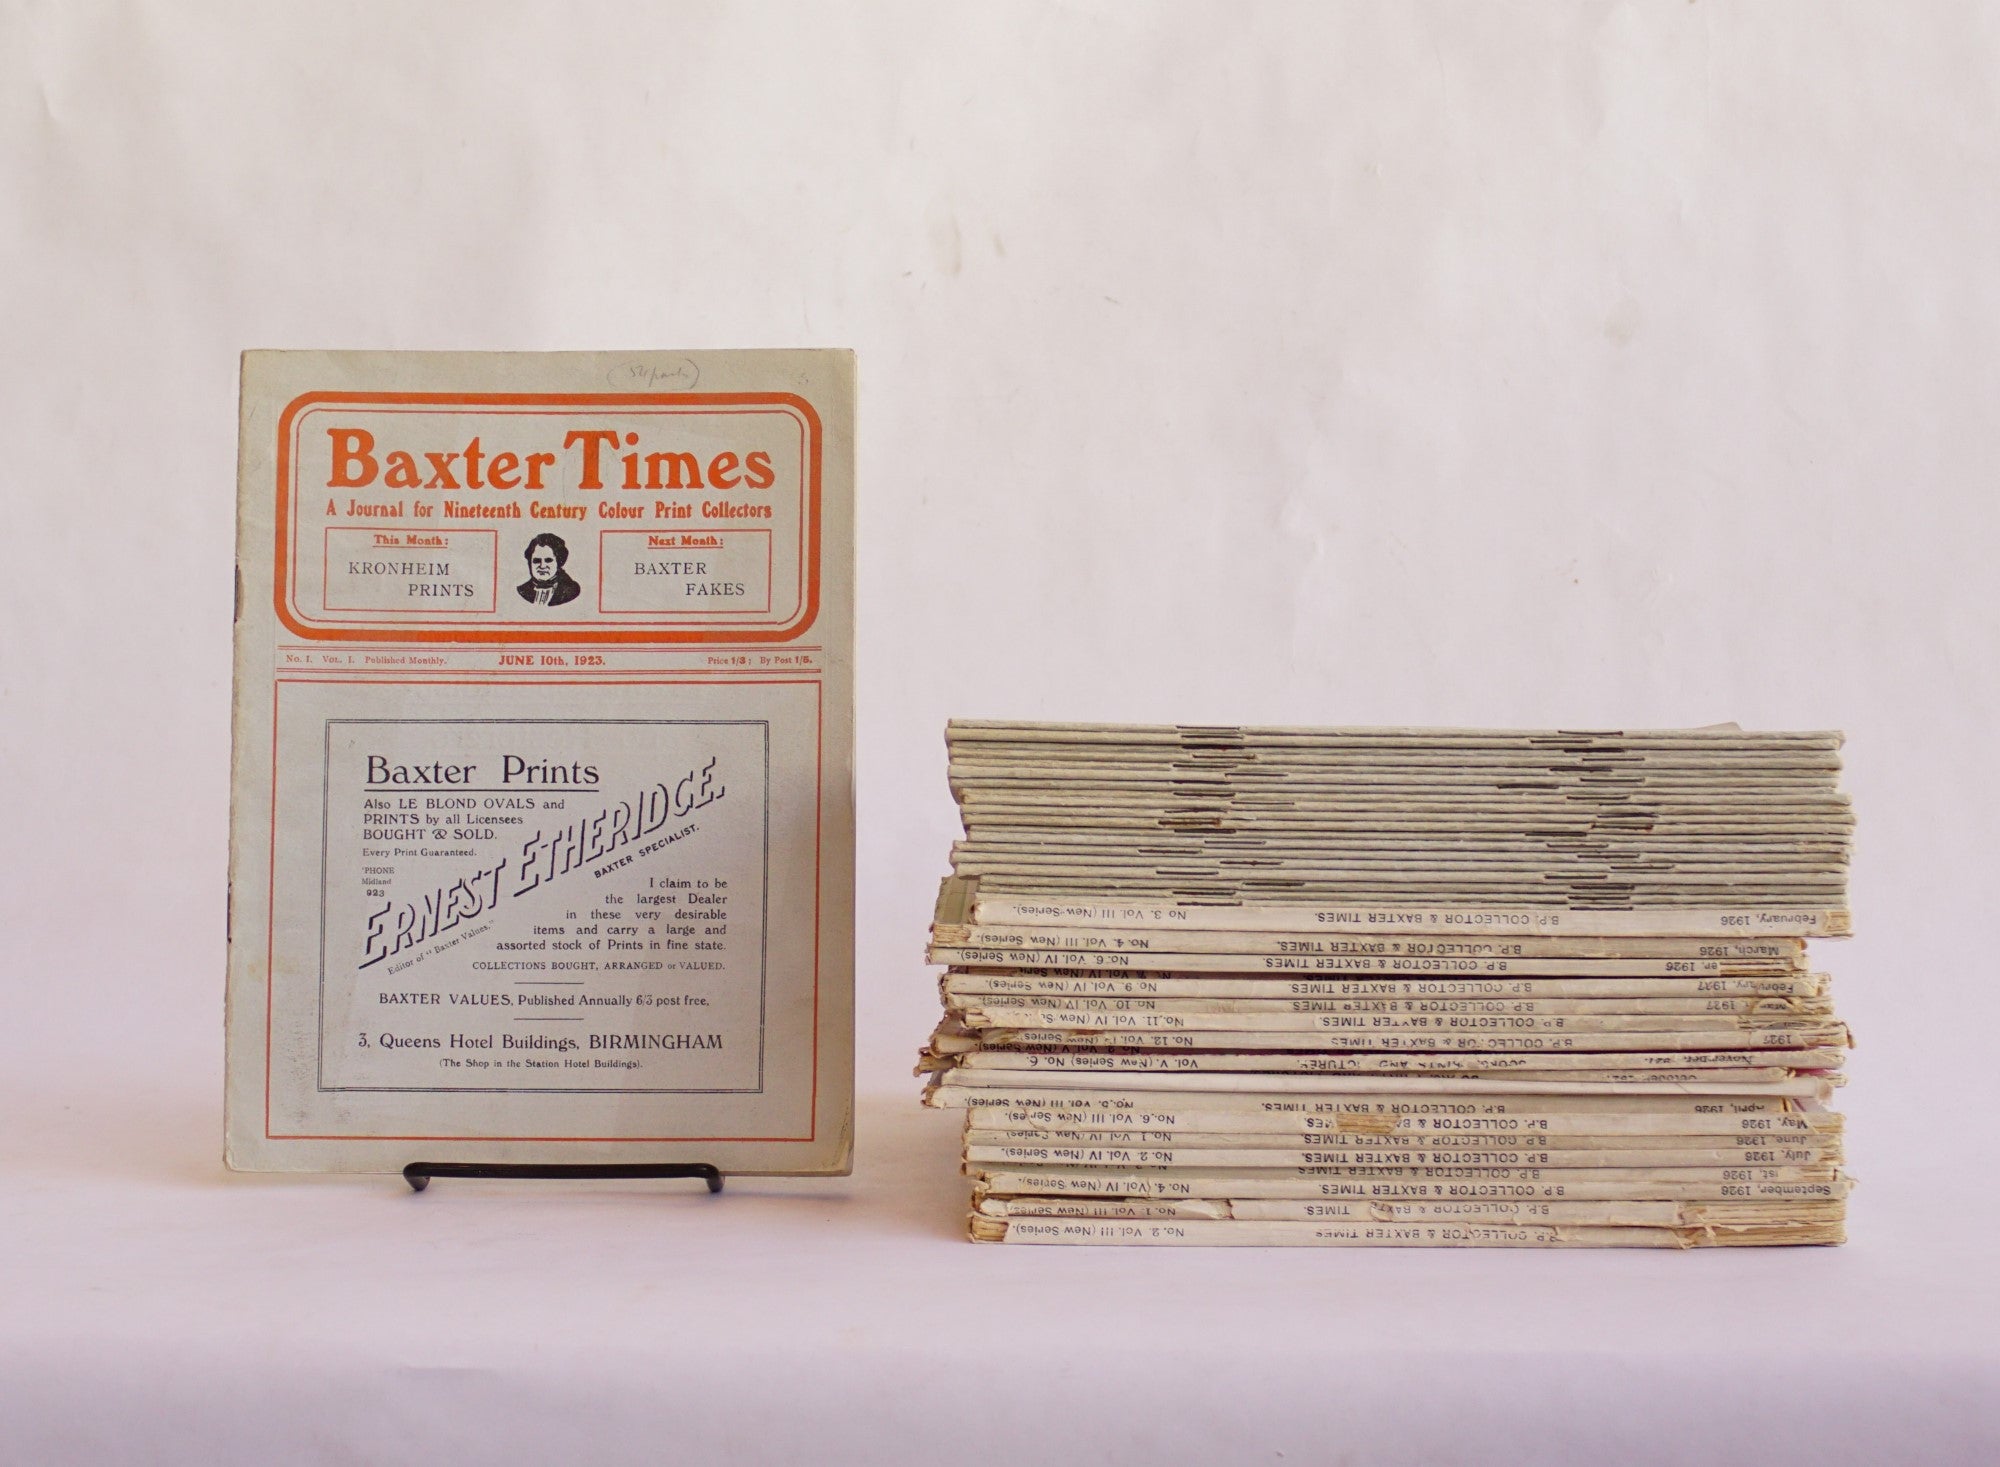  - Baxter Times [Together with] Bp Collector and Baxter Times [Together with] Books Prints and Pictures